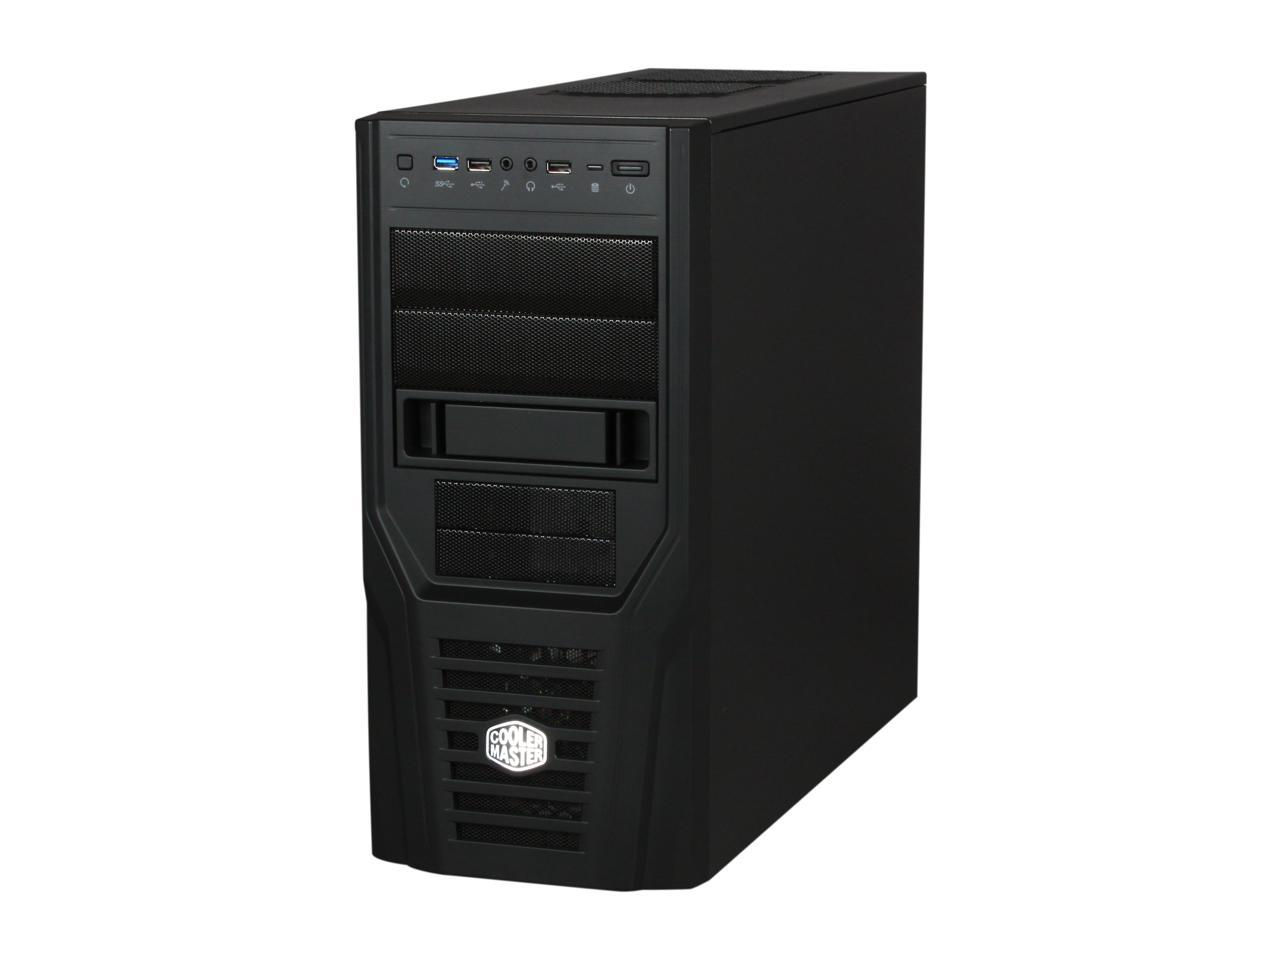 Cooler Master Elite 431 Plus Mid Tower Computer Case With Windowed Side Panel And Usb 30 7134